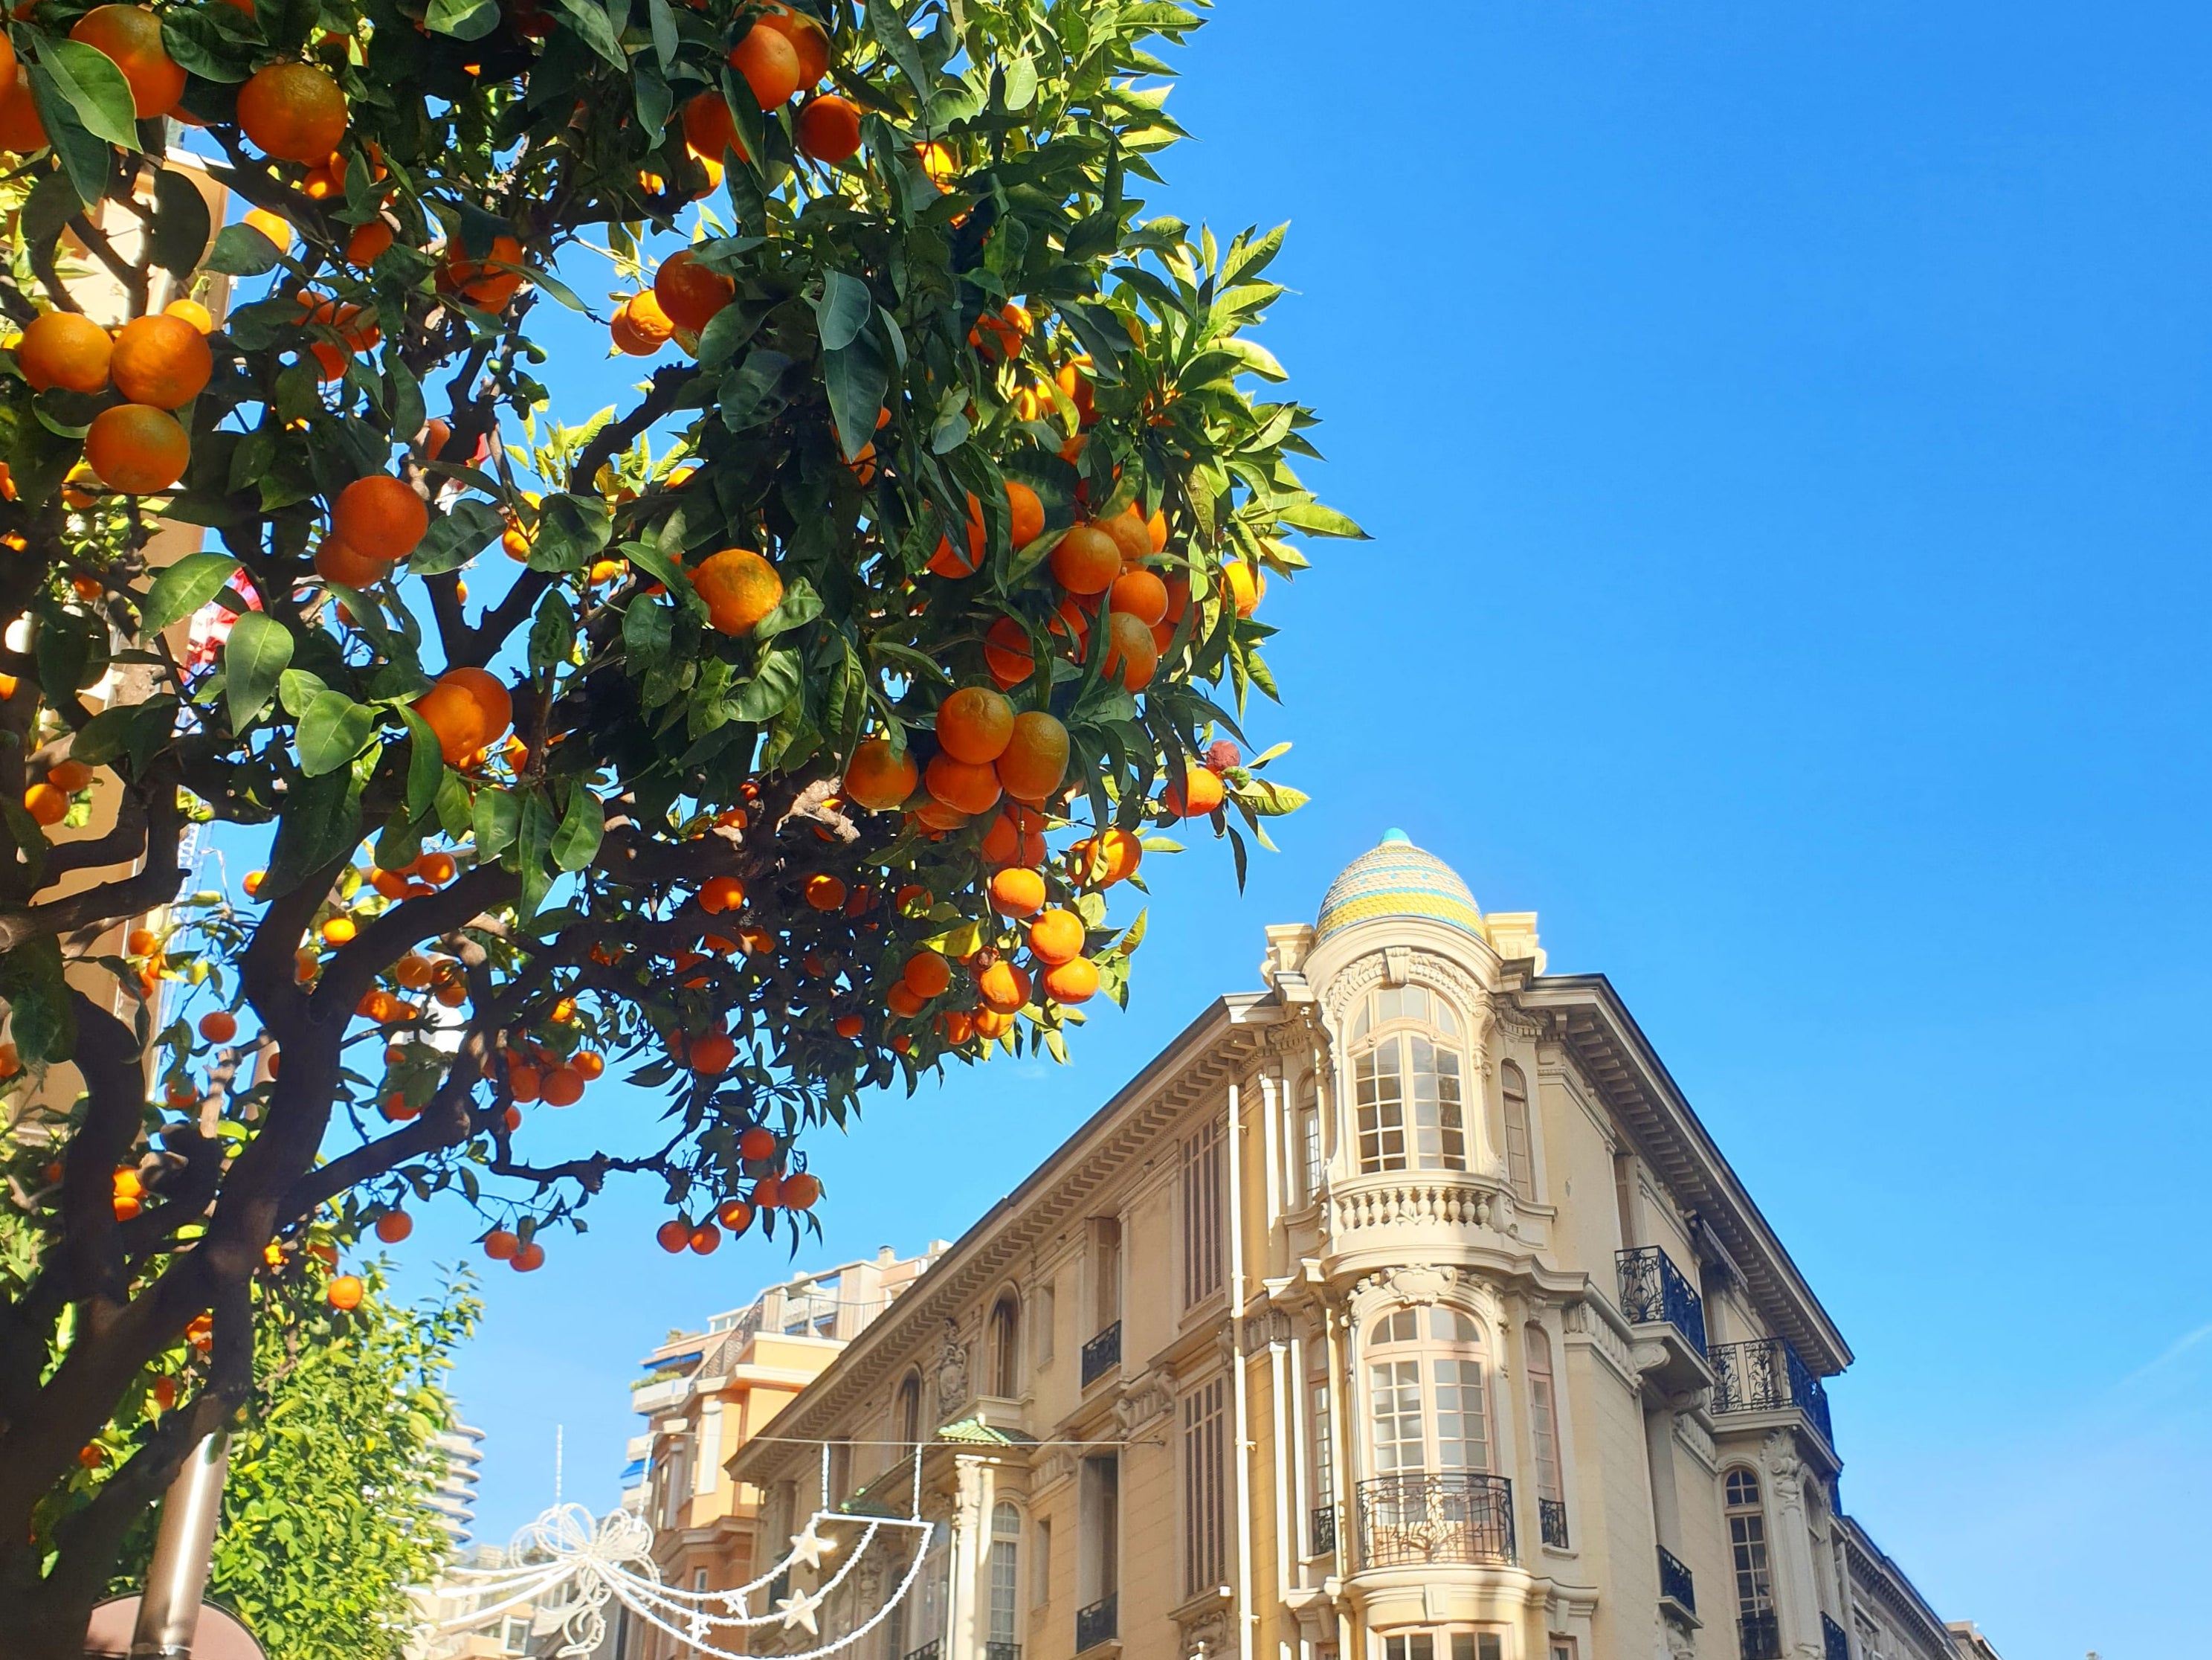 Monaco’s bitter oranges have been put to good use to produce a sweet signature liqueur